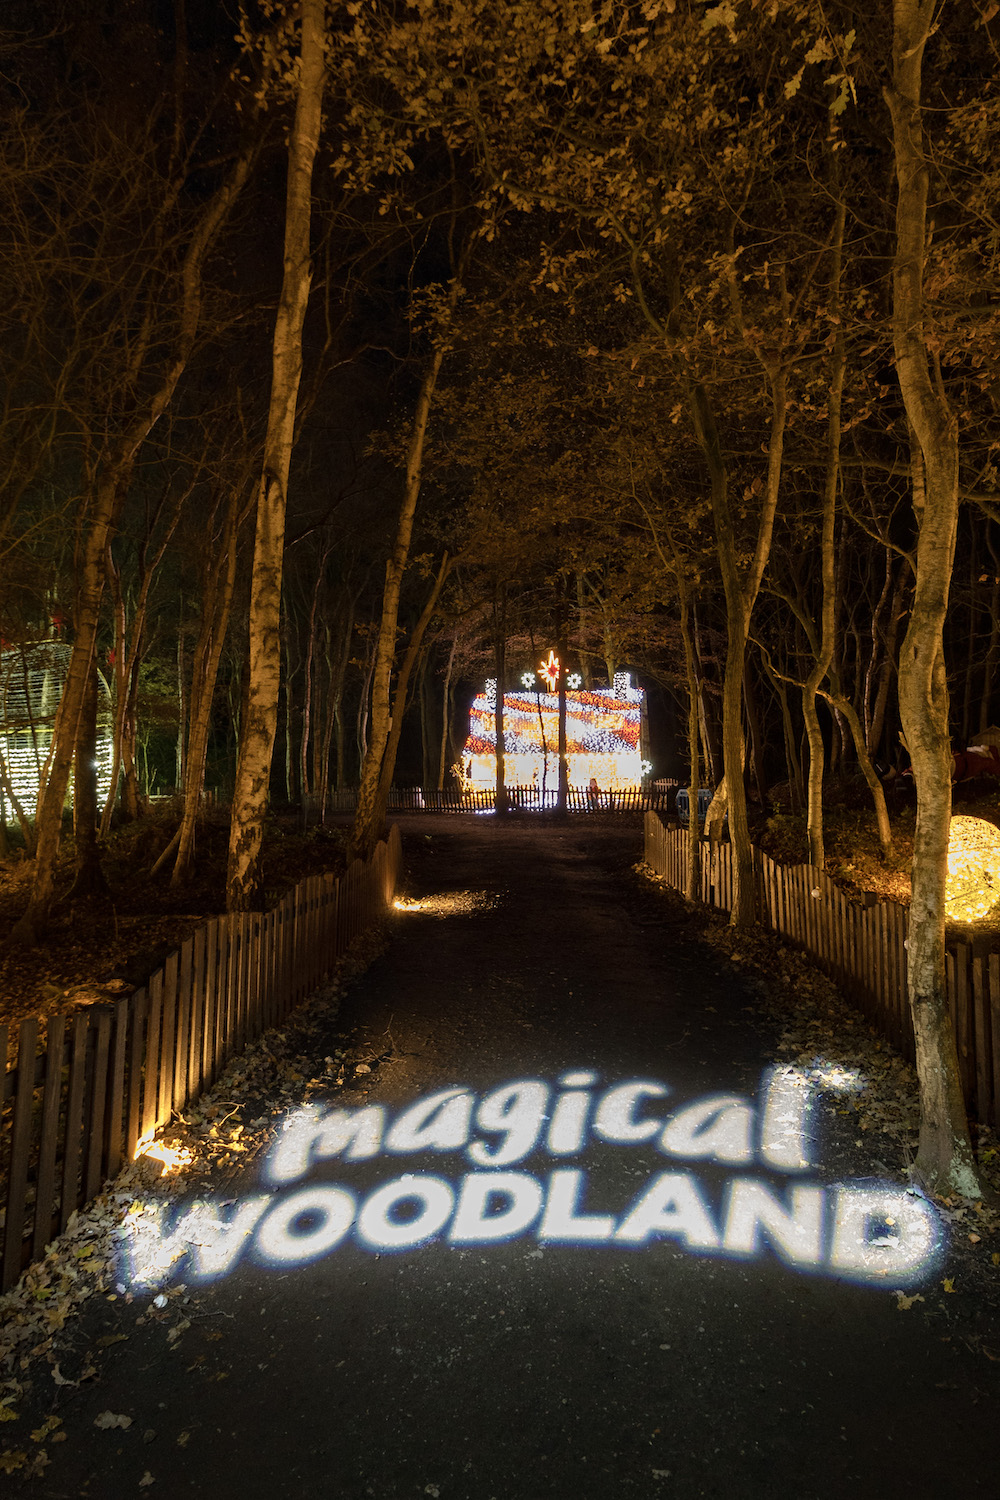 Magical Woodland - Blakemere - The guide Liverpool